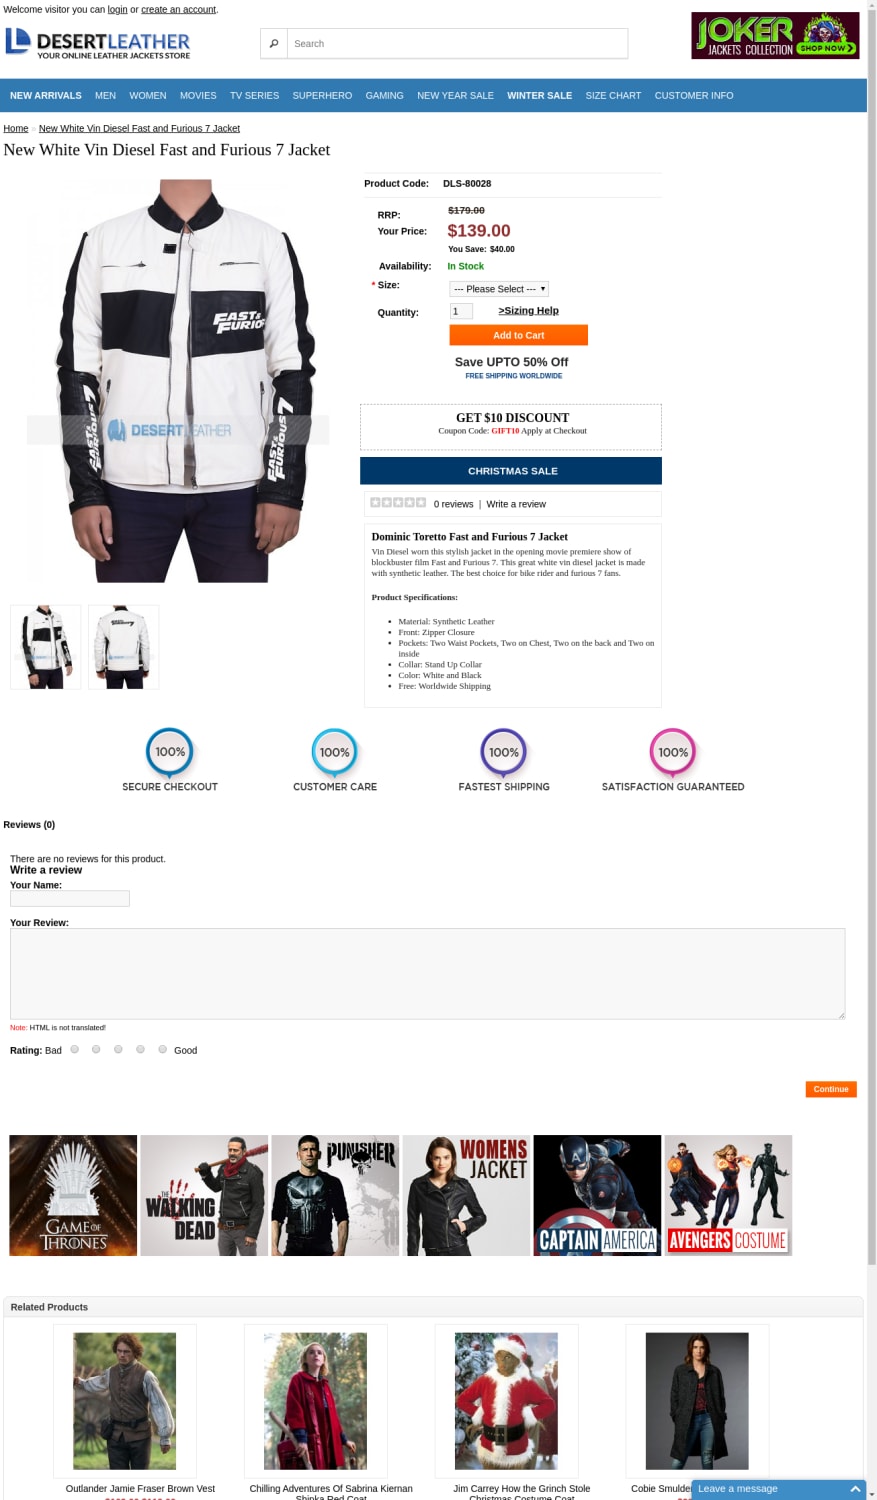 New White Vin Diesel Fast and Furious 7 Jacket